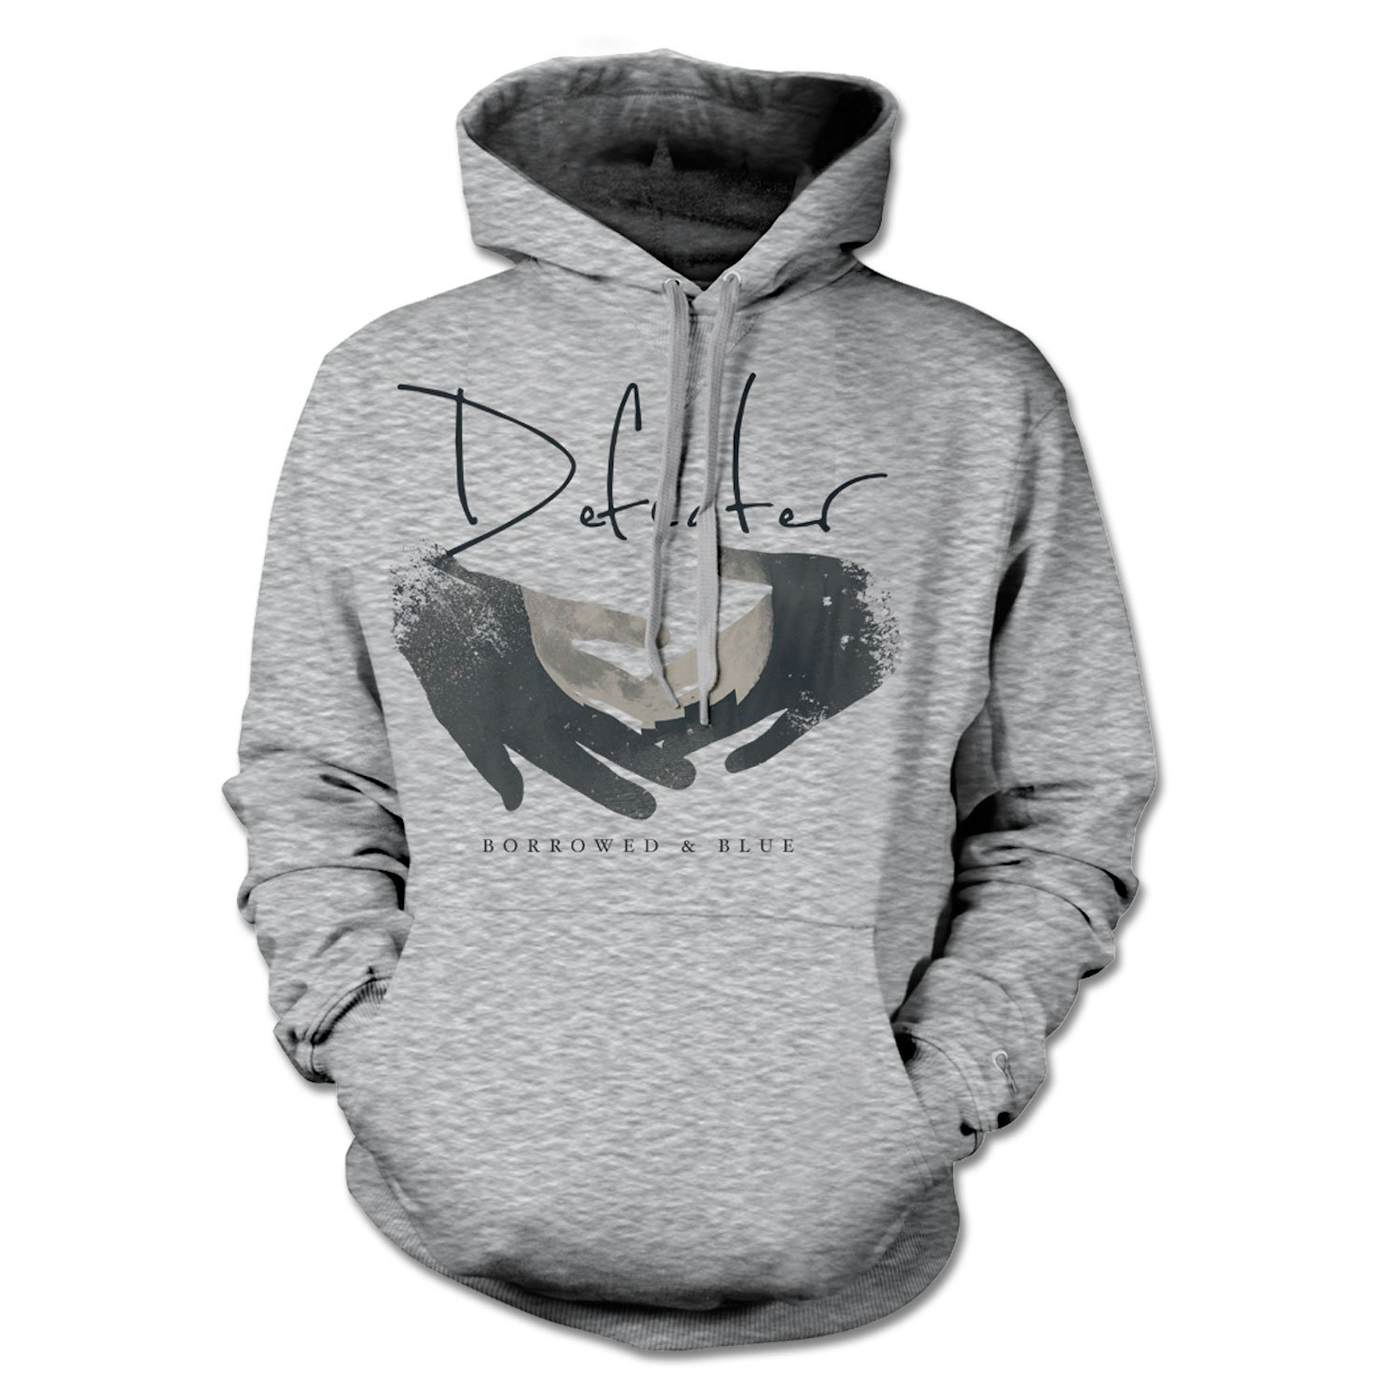 Defeater Borrowed Blue Pullover Hoodie (Heather Gr